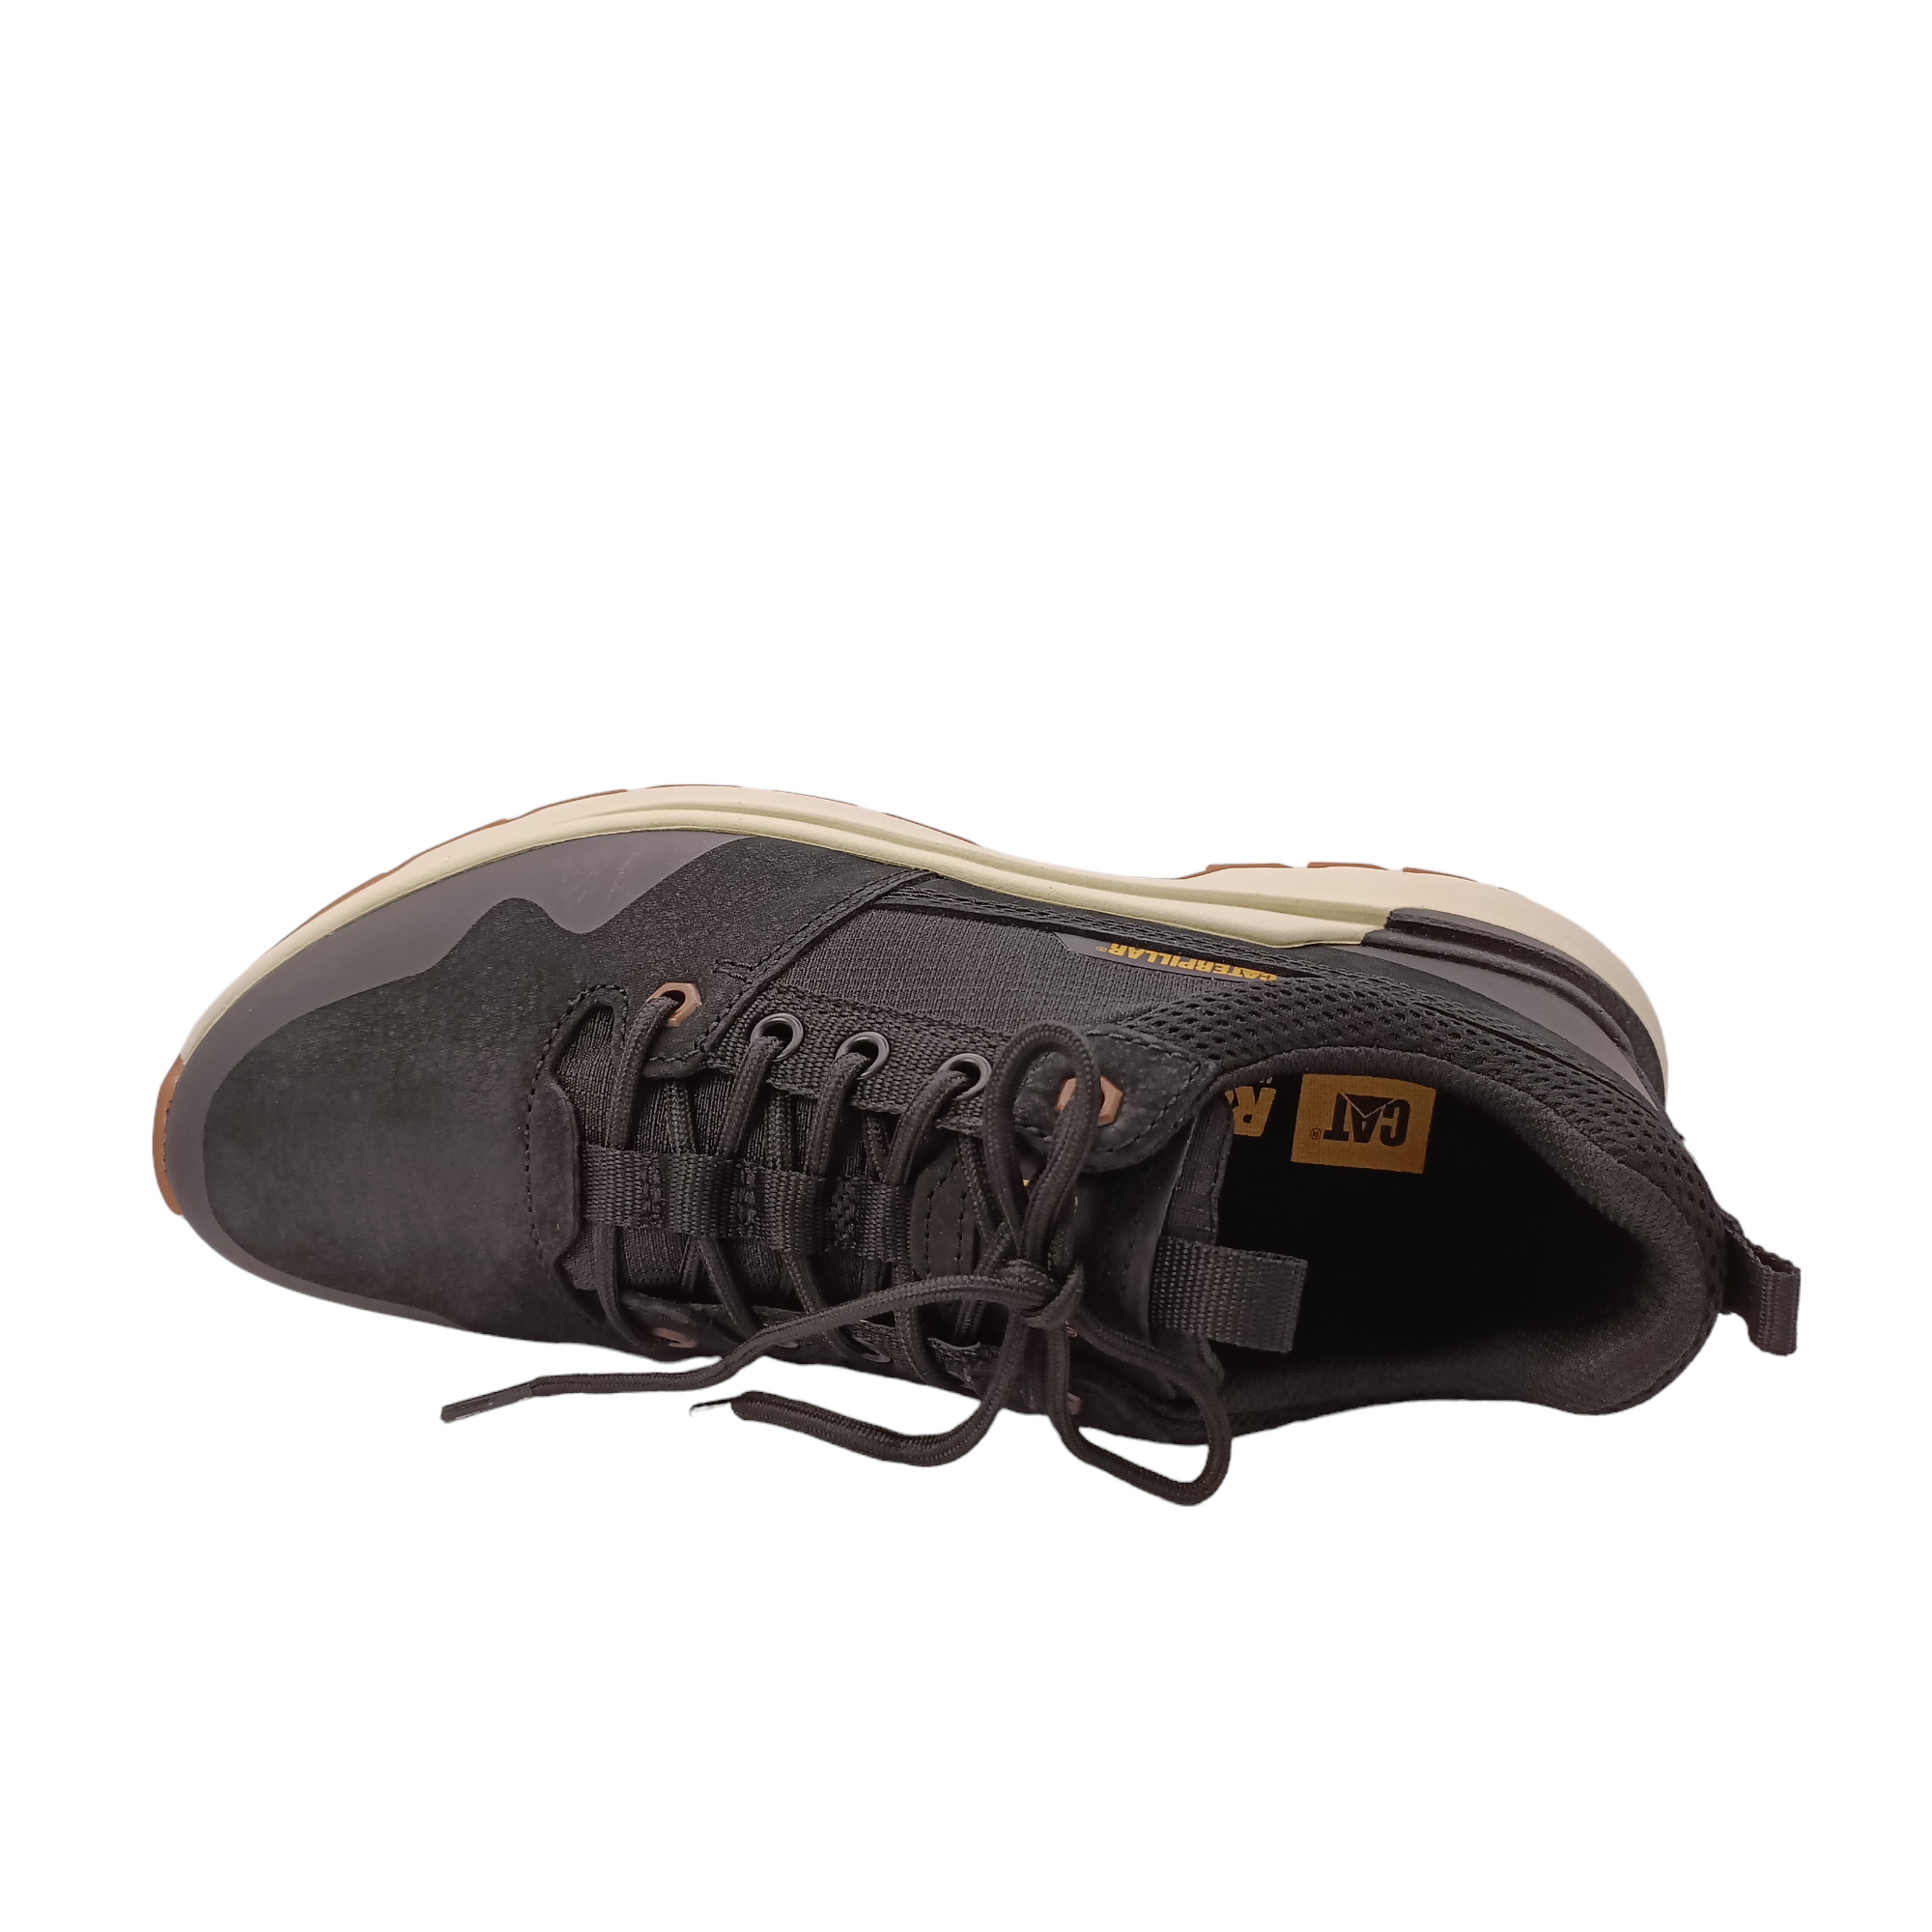 Shop Colorado Lo Caterpillar - with shoe&me - from Caterpillar - Sneakers - Mens, Sneaker, Winter - [collection]